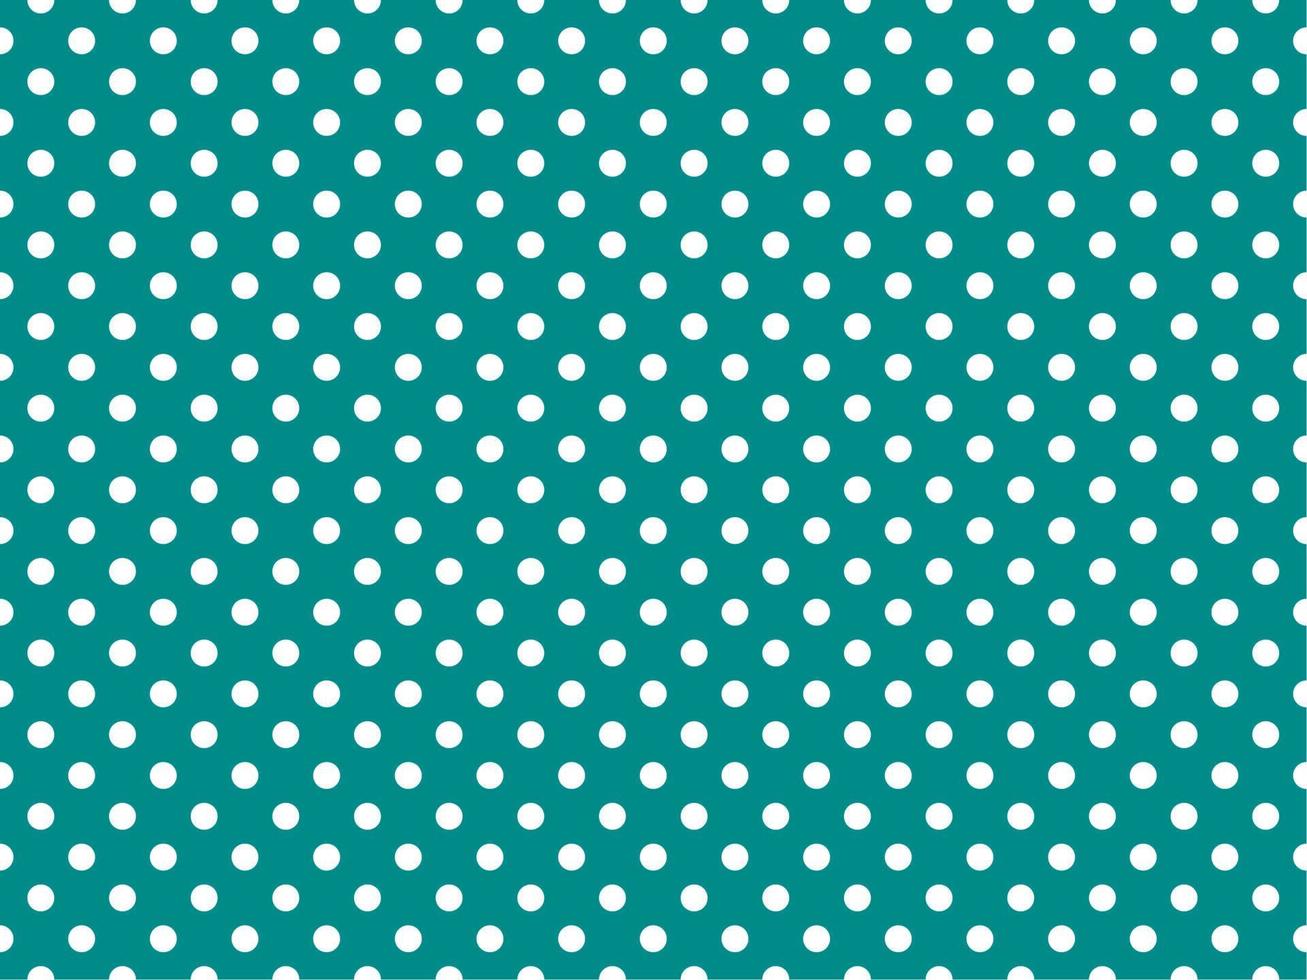 wit polka dots over- donker cyaan achtergrond vector